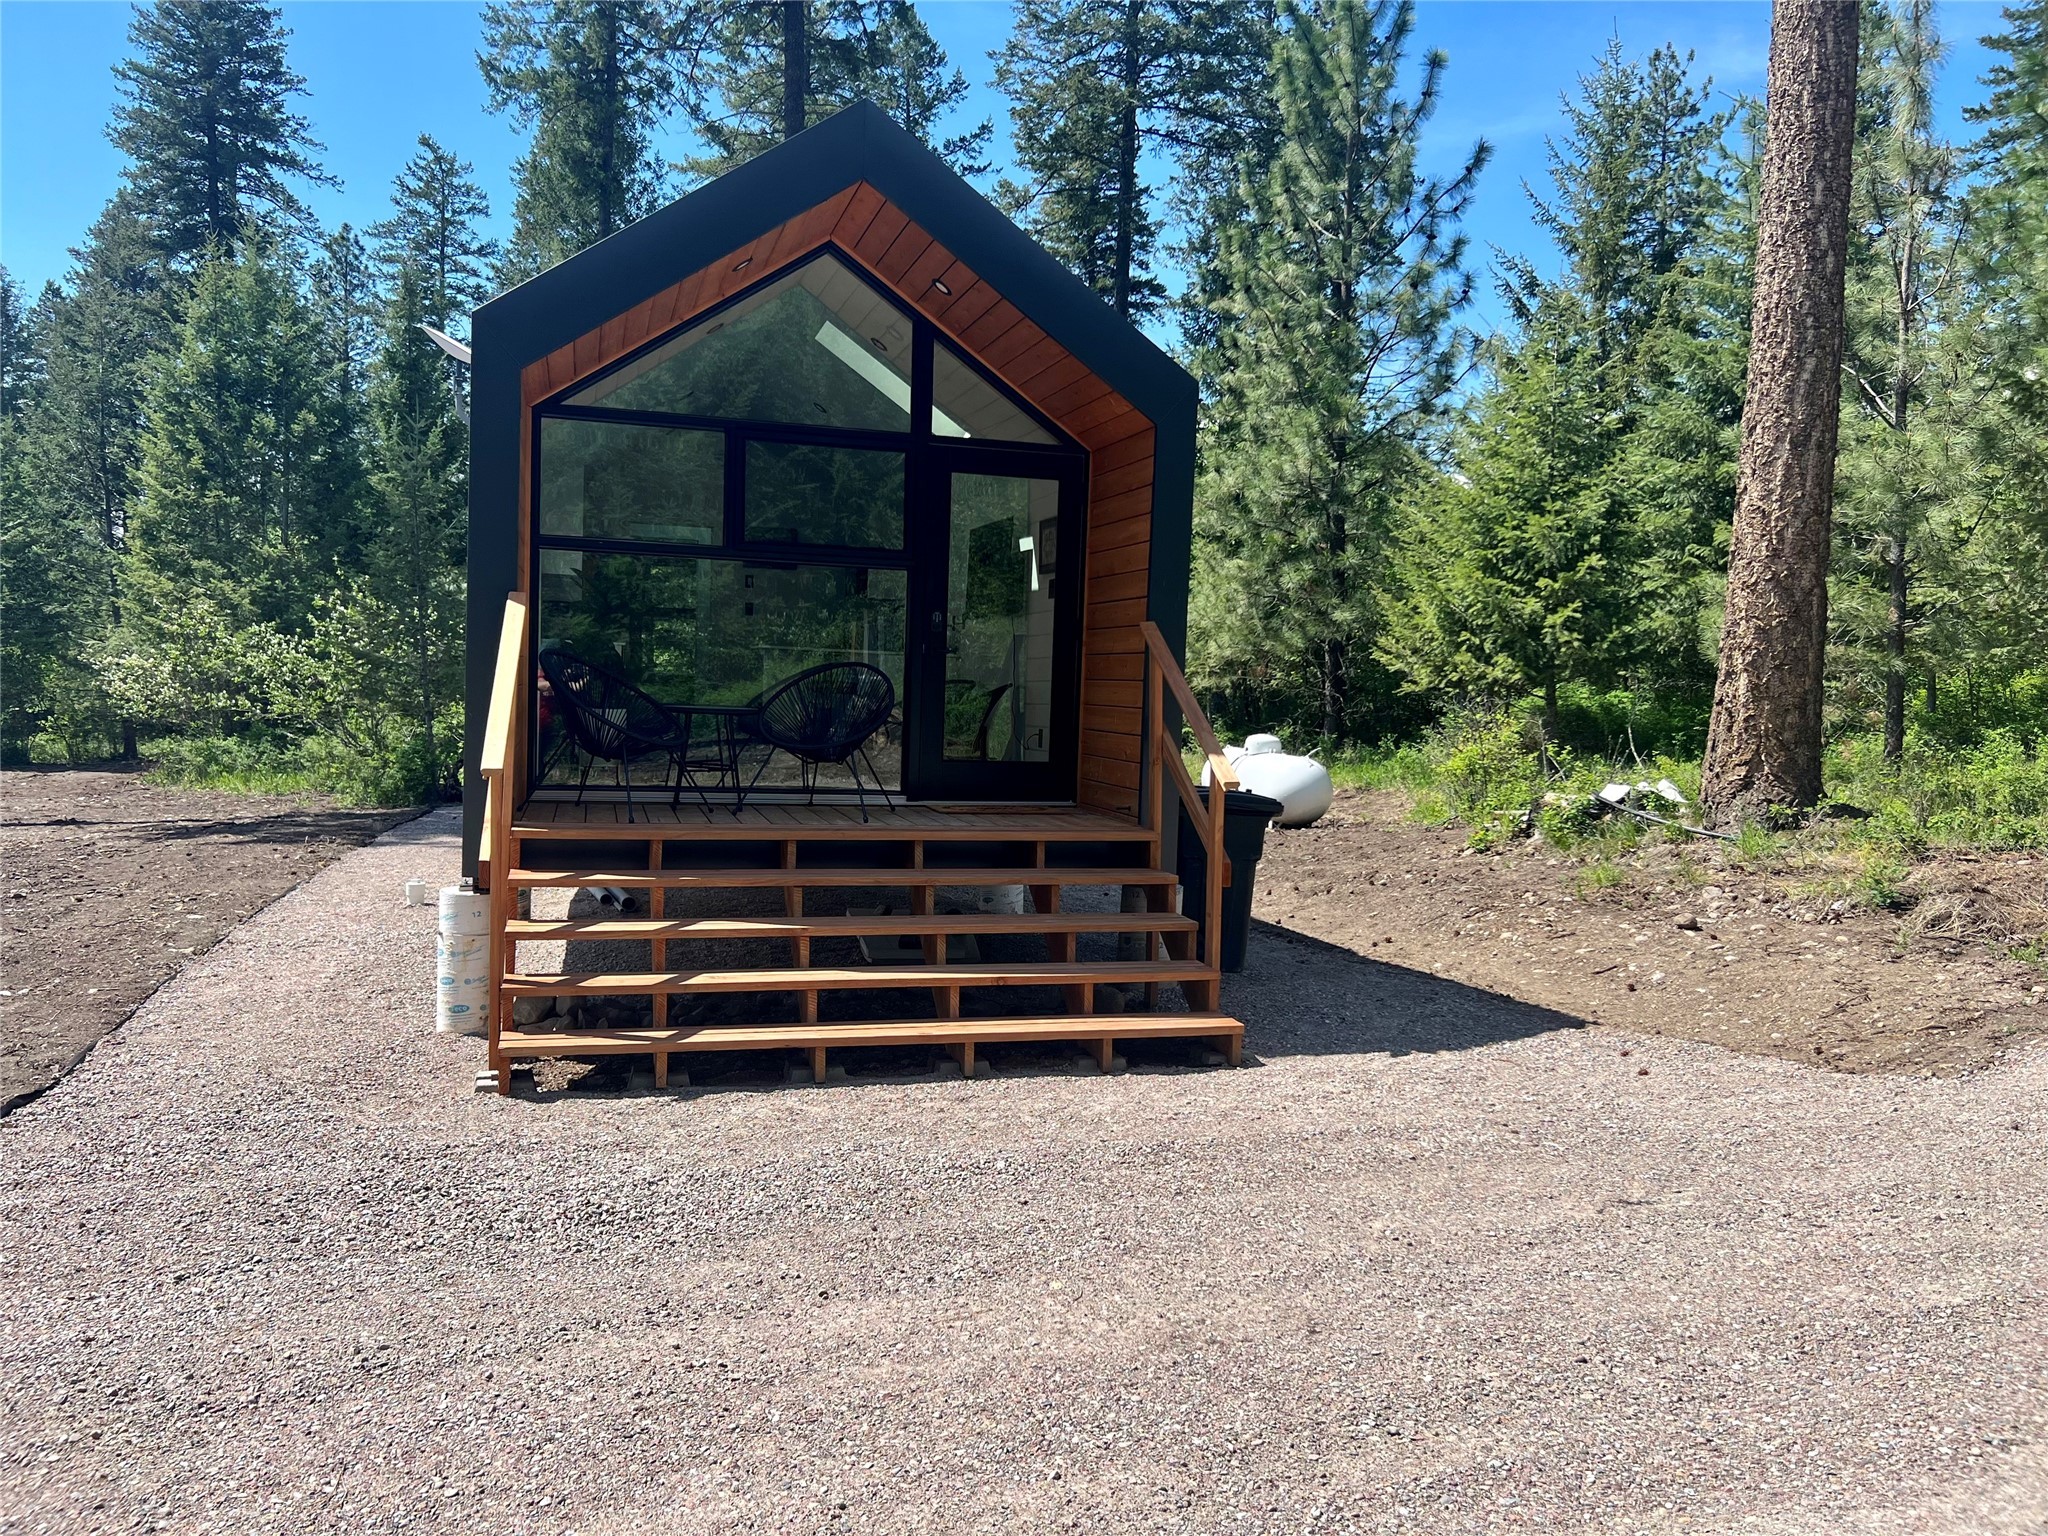 Beautiful Tiny Home on 7.5 Acres with a Seasonal Creek

Escape to the serene beauty of Western Montana and experience the joys of small-scale living with this stunning tiny home nestled on 7.5 acres of natural splendor. Tucked away in the heart of nature, this property offers a peaceful retreat that's both cozy and spacious in its own unique way.

Step inside the open living area where the boundary between indoors and outdoors seems to blur. Large windows frame breathtaking views of your own private wilderness. The compact yet well-equipped kitchen boasts modern appliances, clever storage solutions, and a dining area for intimate meals.

Step outside onto your private retreat and enjoy your morning coffee as you listen to the seasonal creek. Soak in the cedar hot tub as you watch the big sky. Mollman creek meanders through the property, offering a soothing backdrop to your daily life. Enjoy peaceful walks along the water's edge or simply relax to the sound of nature. Property also includes RV electrical hookup. Schedule a showing today! Call Amber Isbell 406-951-0849 or your real estate professional.